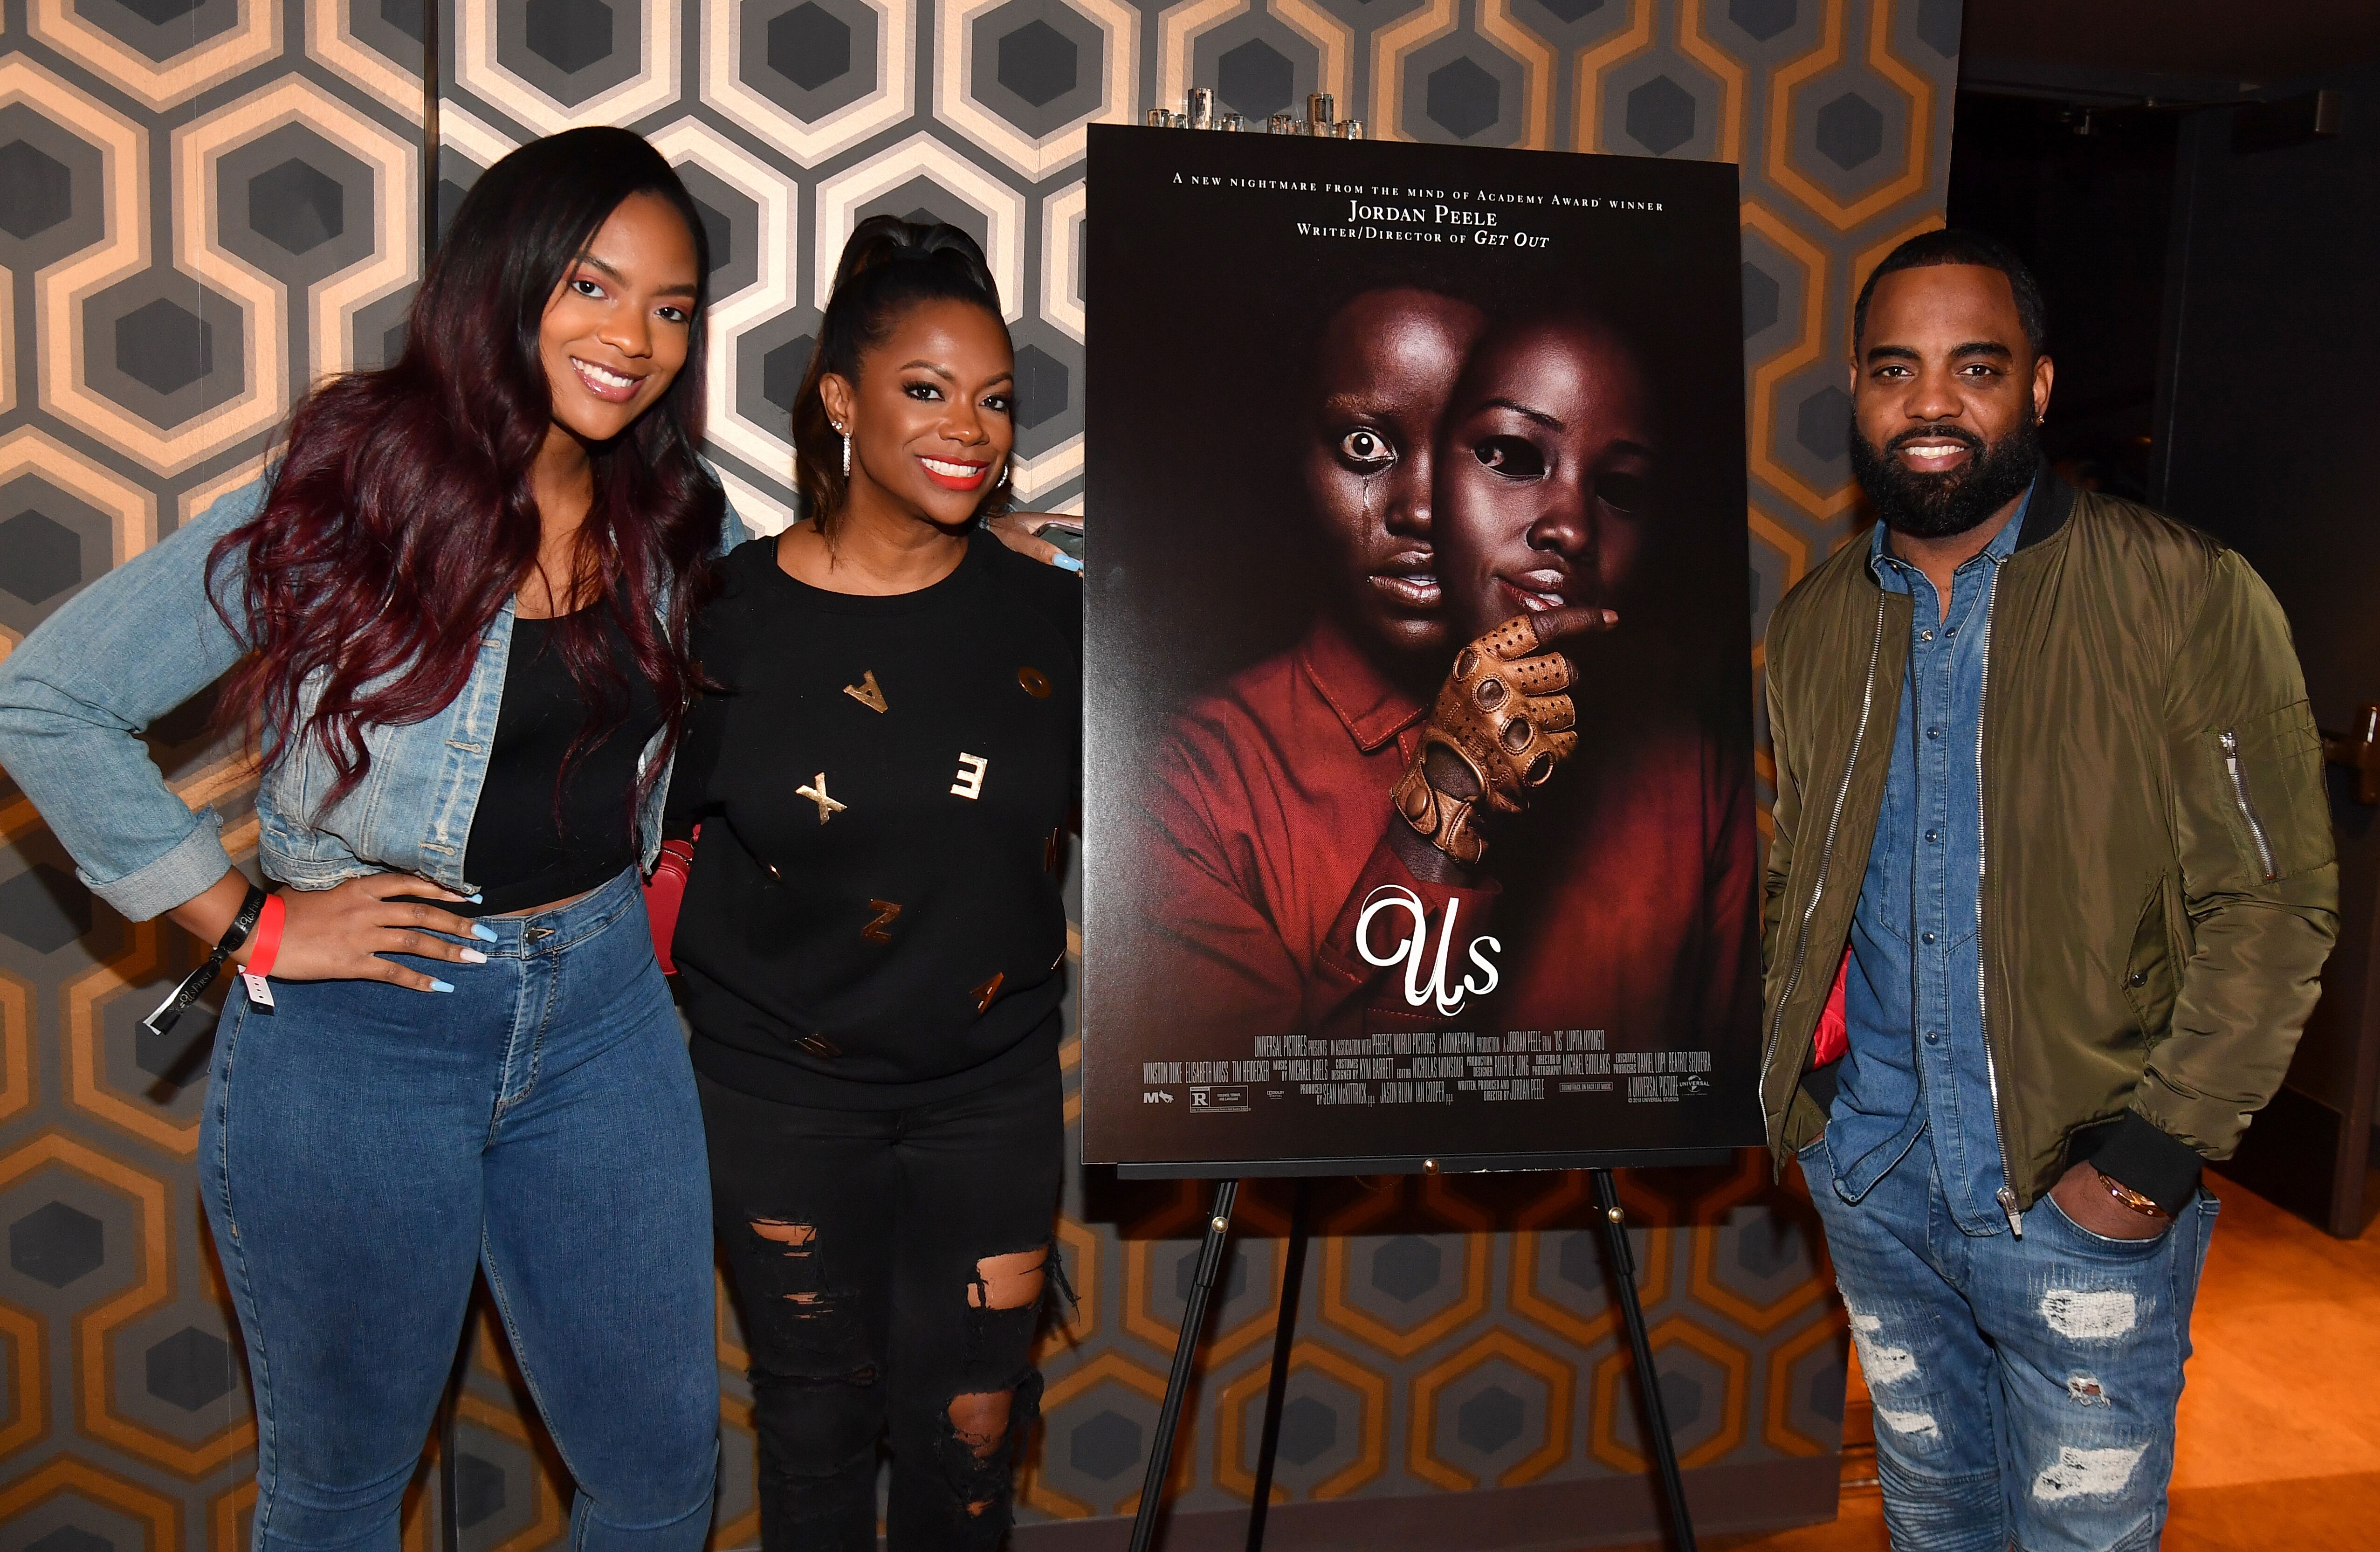 Kandi Burruss, husband Todd Tucker and daughter Riley at the premier of "Us"/ Source: Getty Images